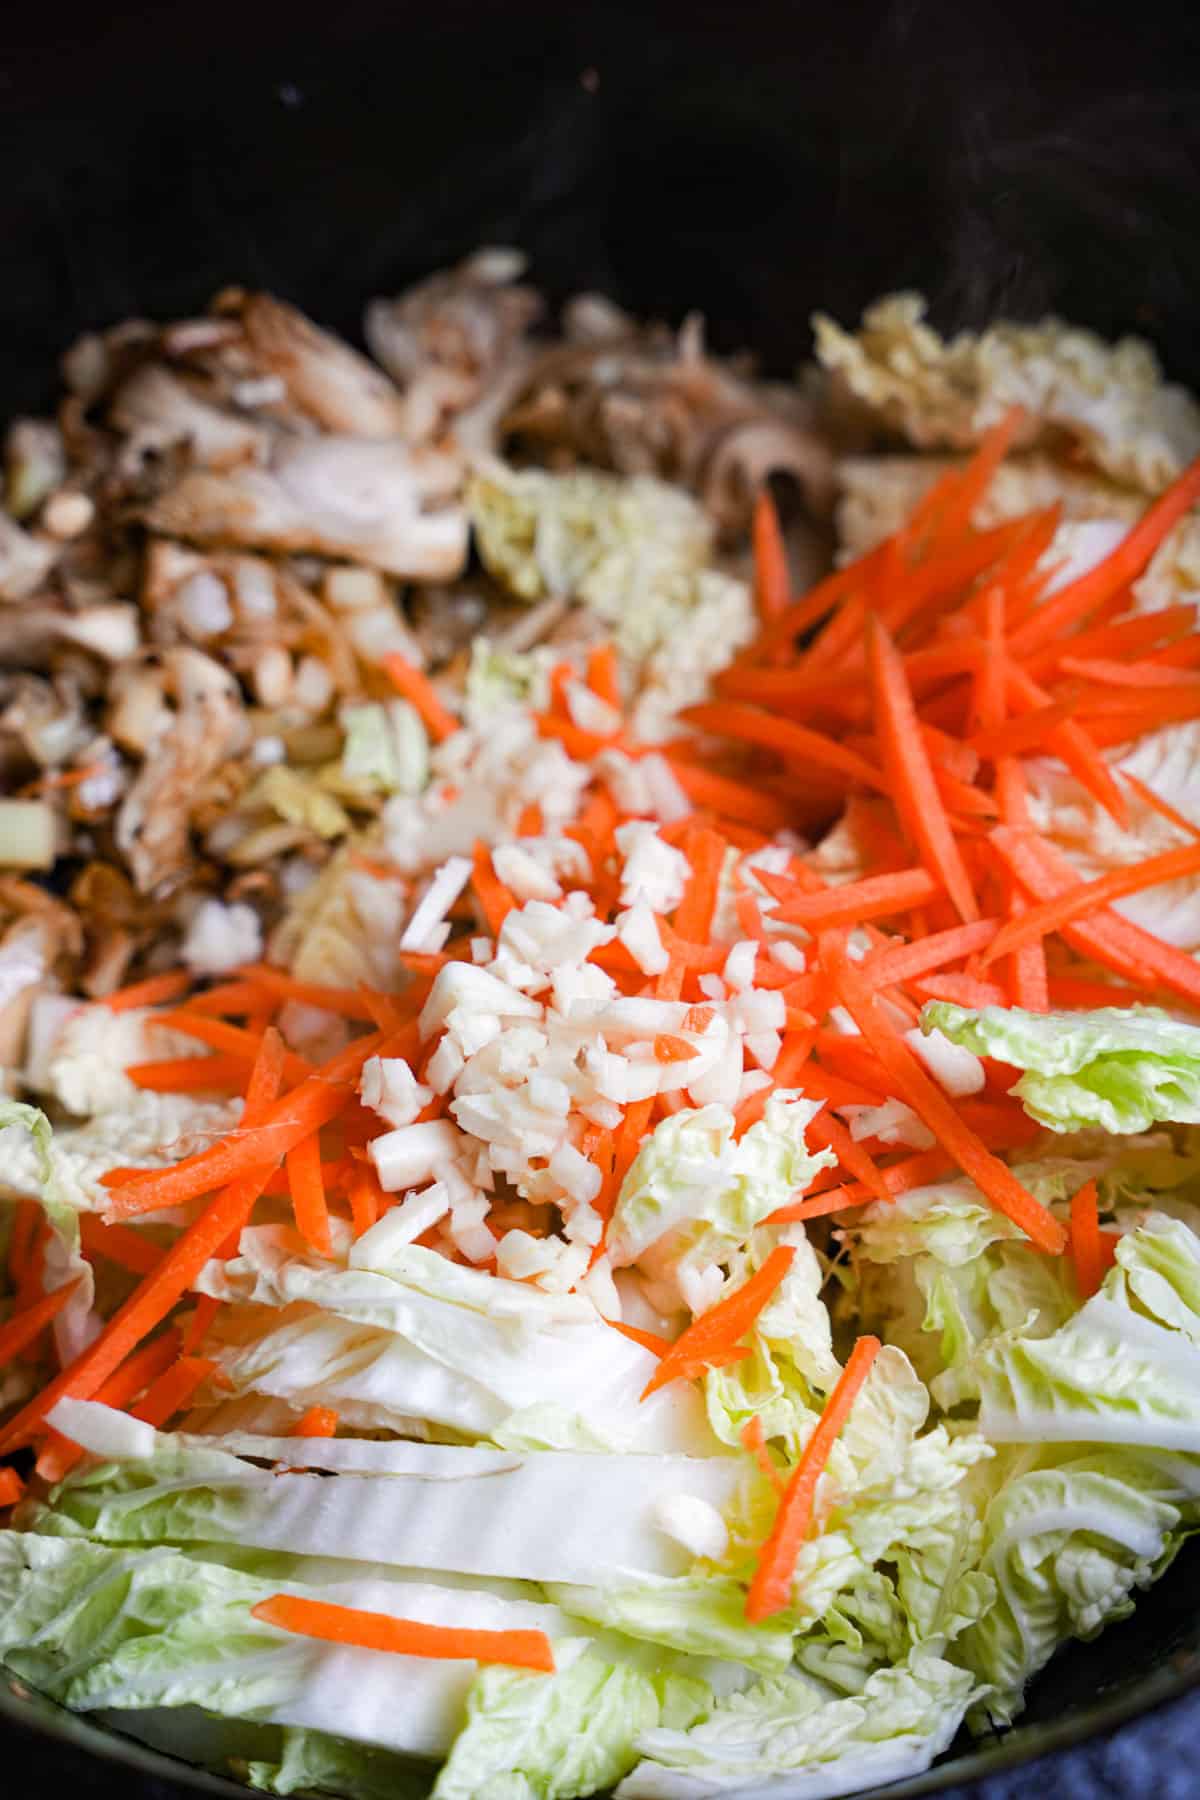 Chopped cabbage, julienne cut carrots, and minced garlic are added to the black metal pan with cooking mushrooms.